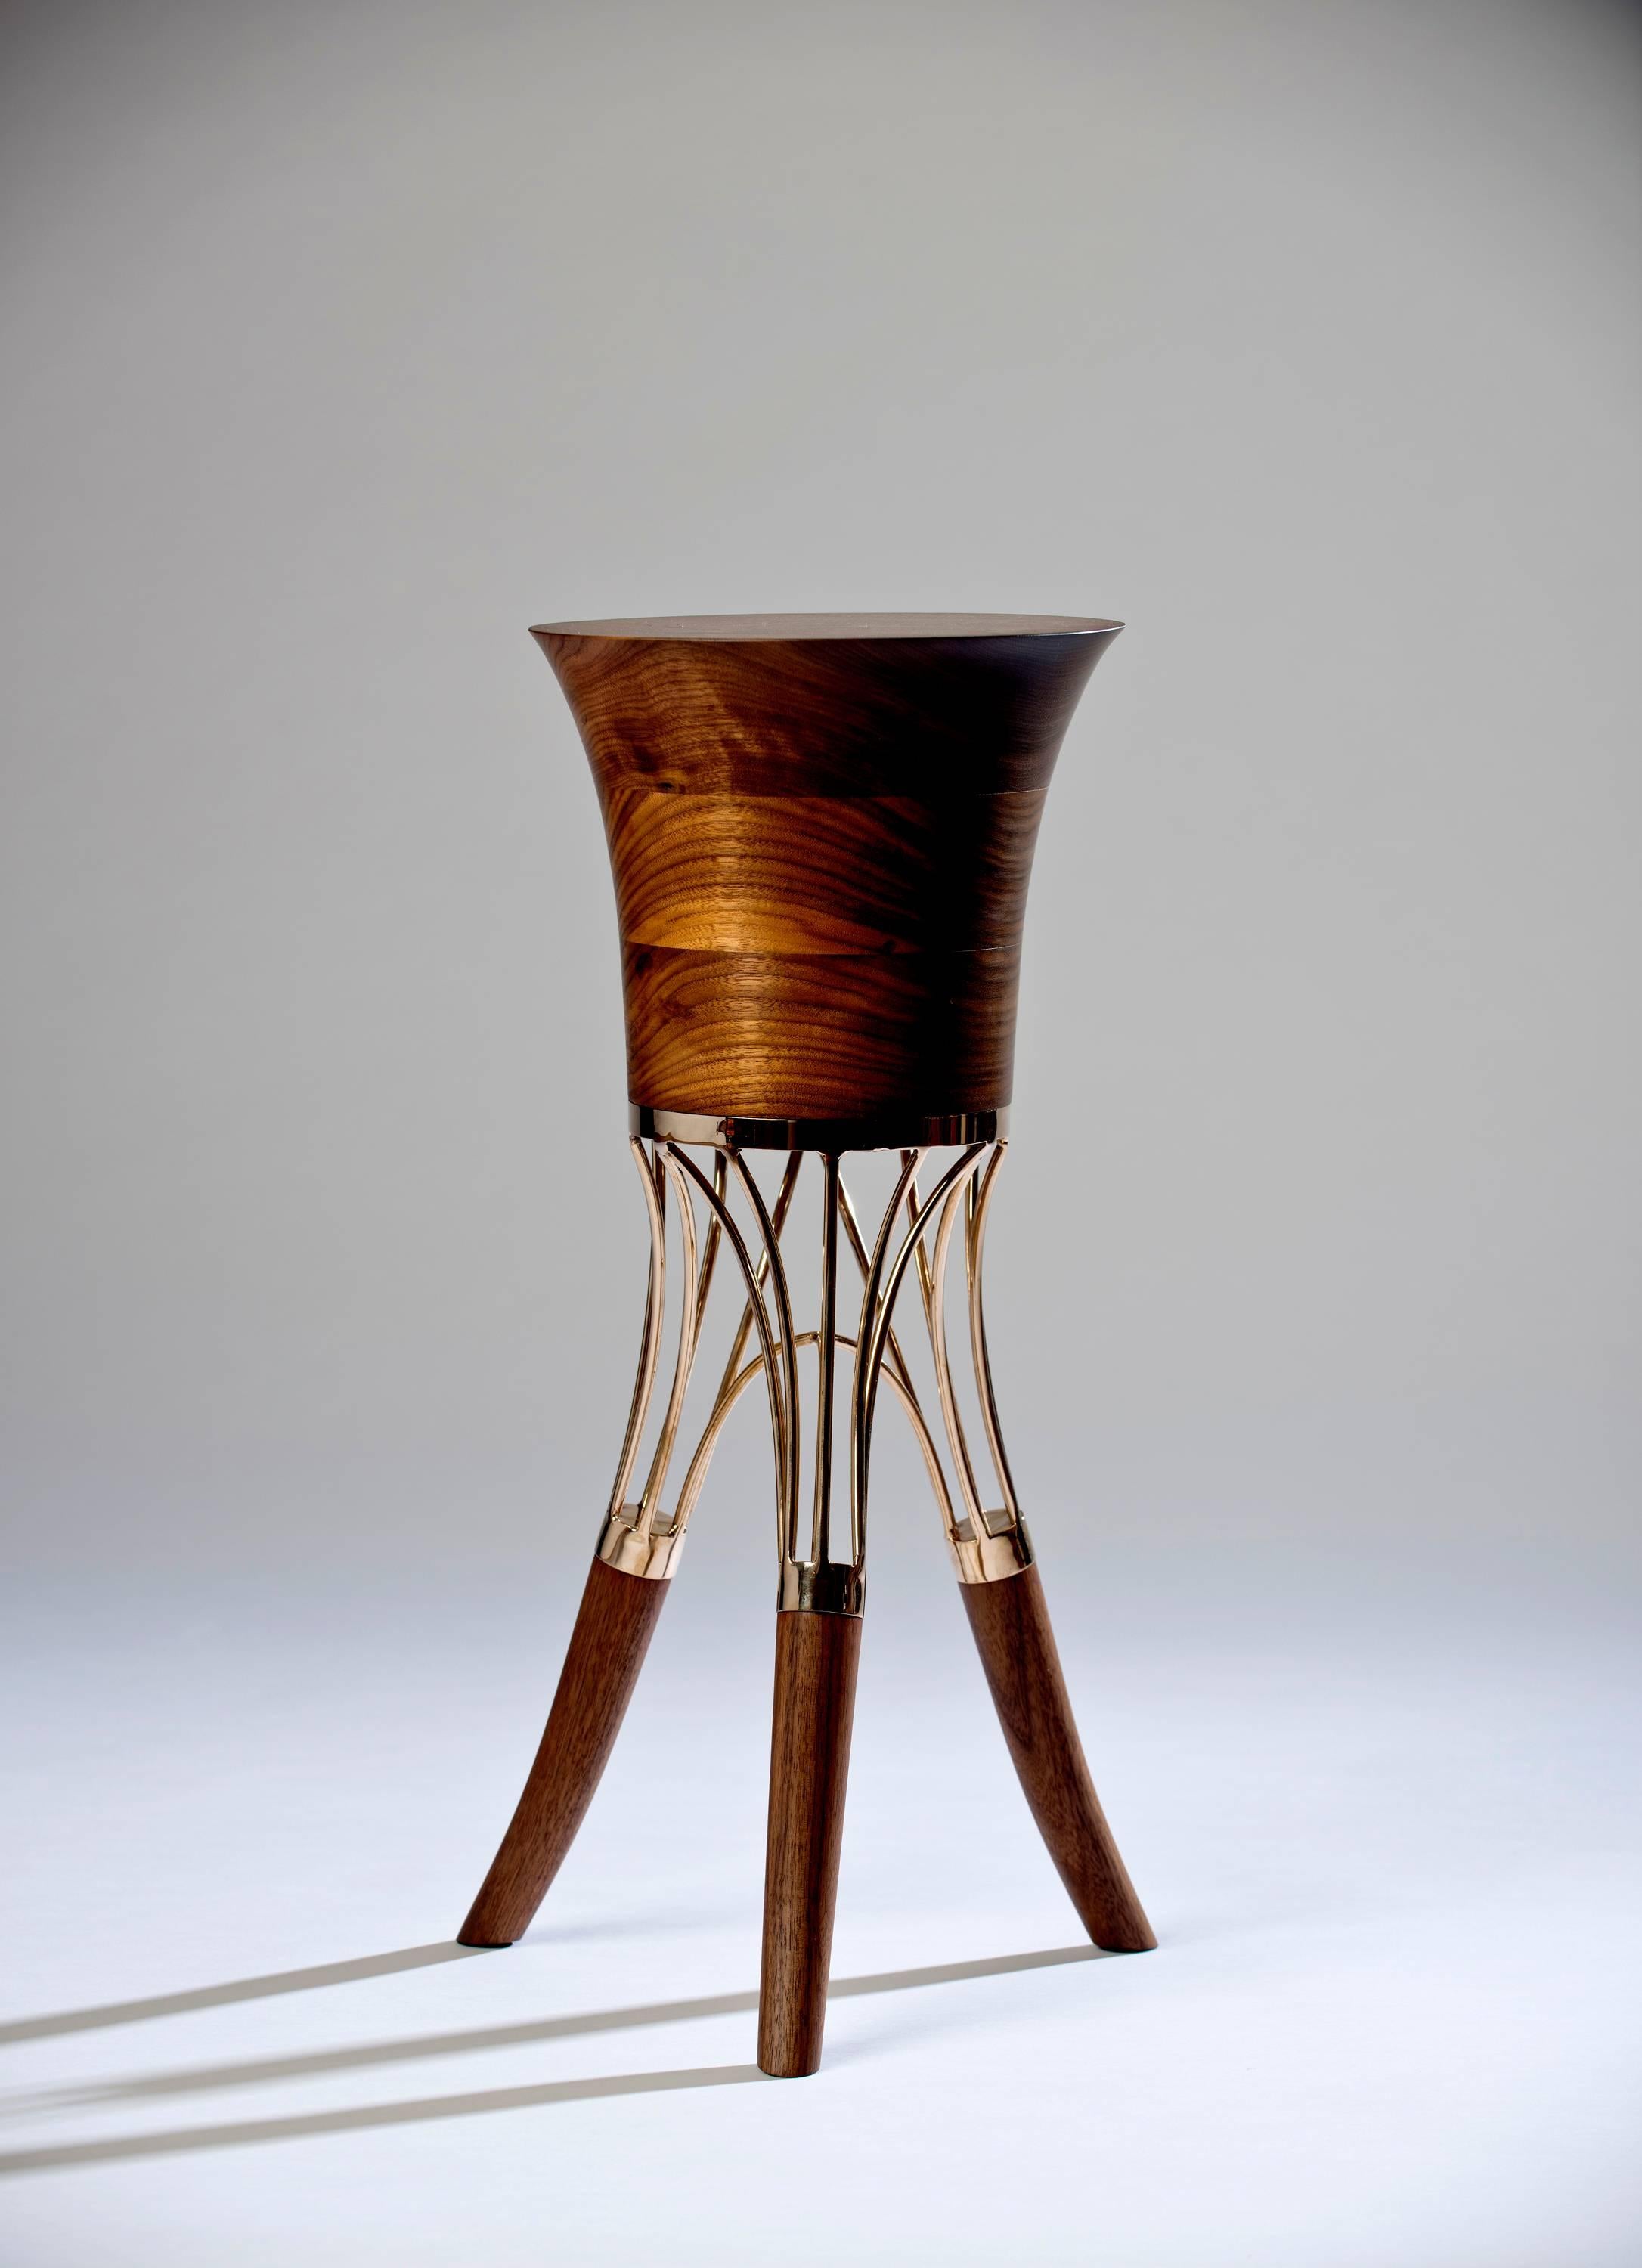 Luxurious American black walnut and cast bronze side table by Alex Roskin.